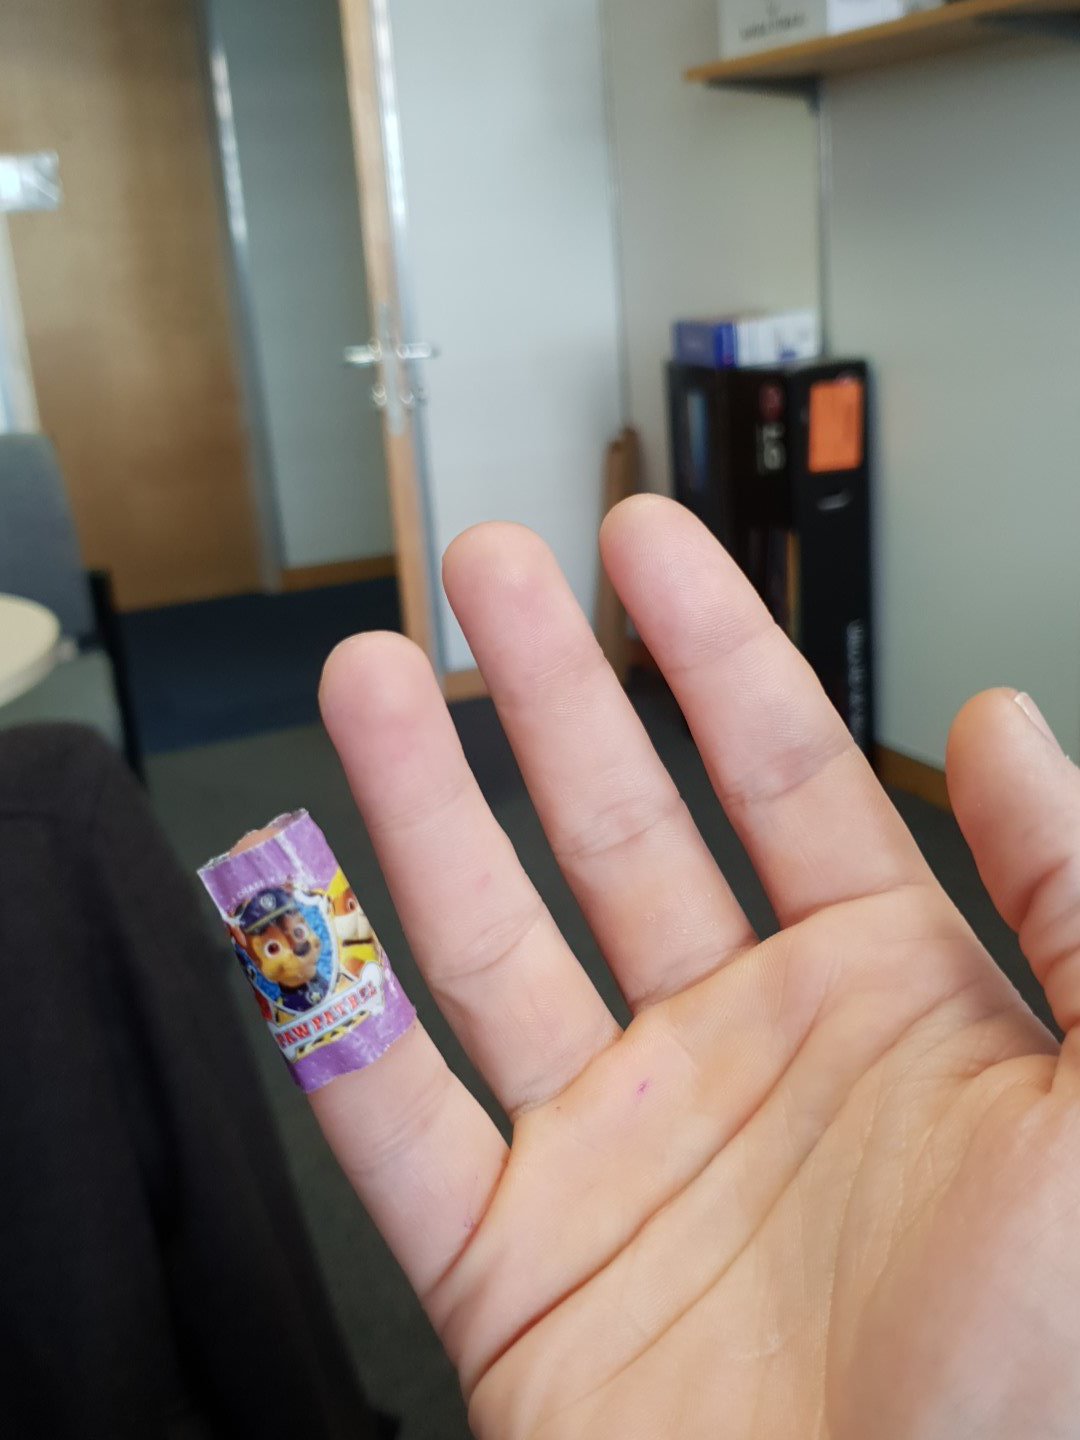 Dental momentum Formuler Mike Pound on Twitter: "A paw patrol plaster let's the students know I'm a  serious academic. https://t.co/SNeDJtqi2G" / Twitter